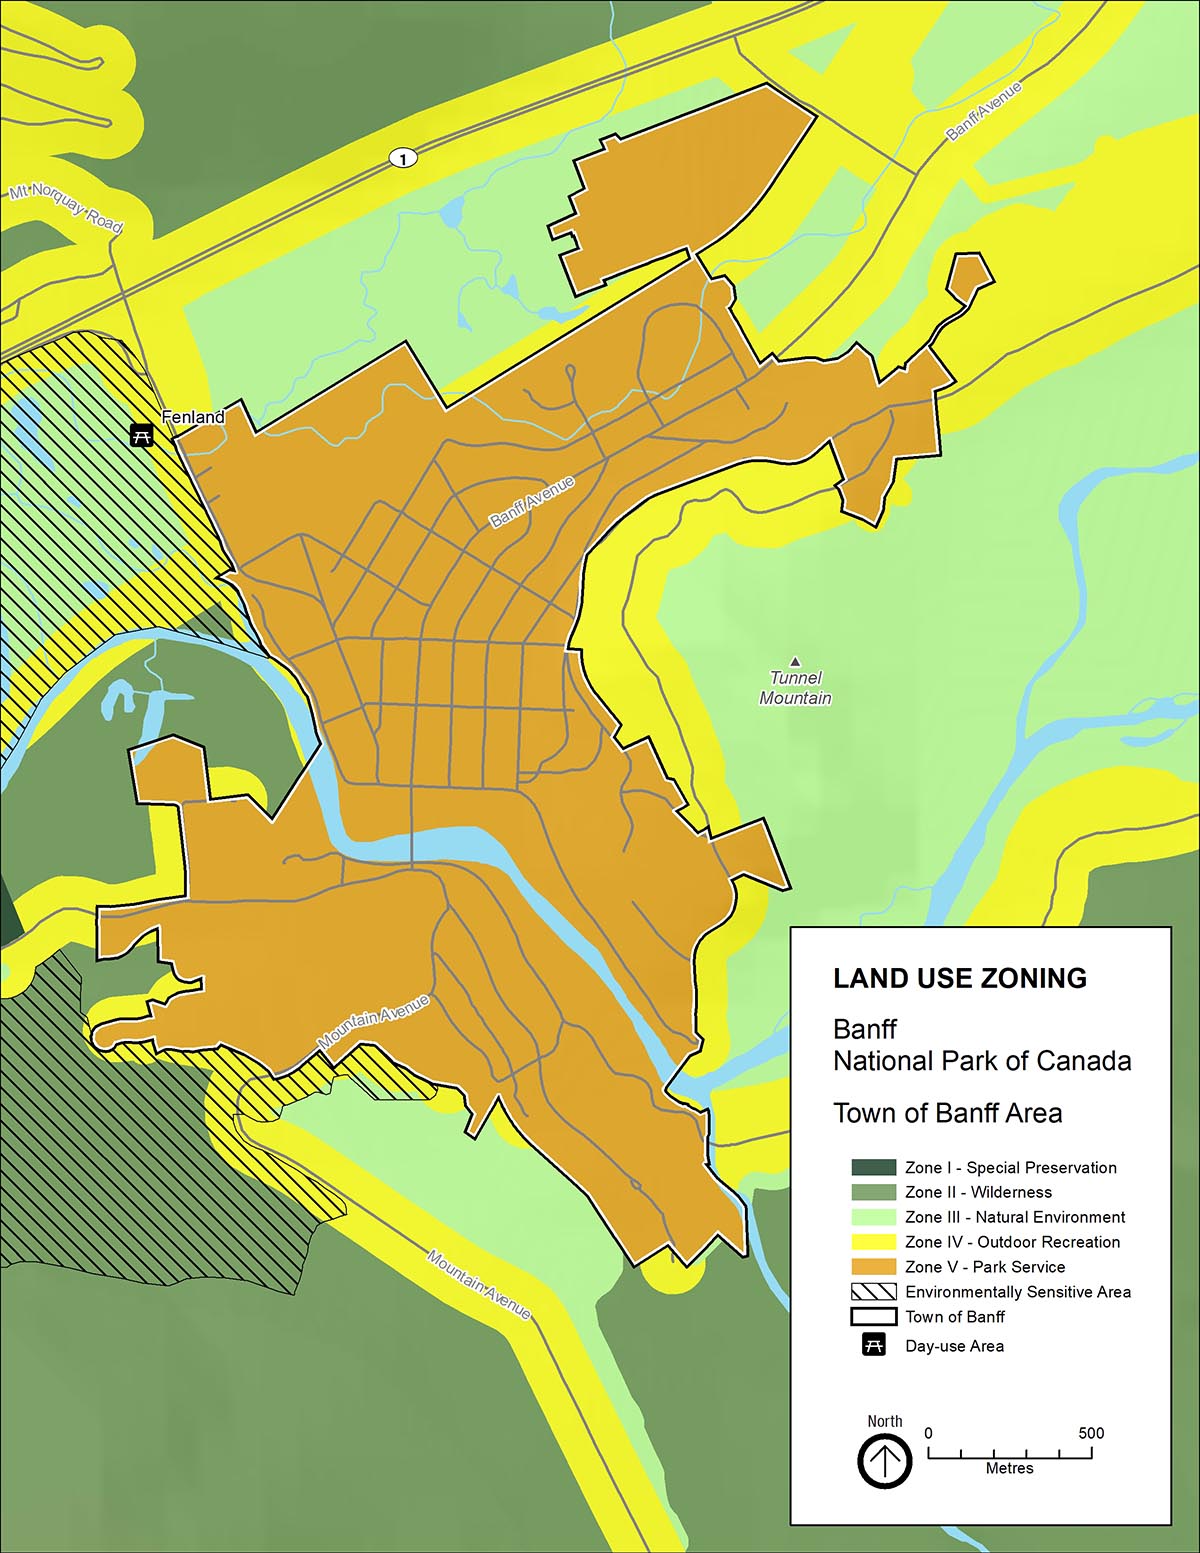  Map 9: Zoning in the town of Banff area